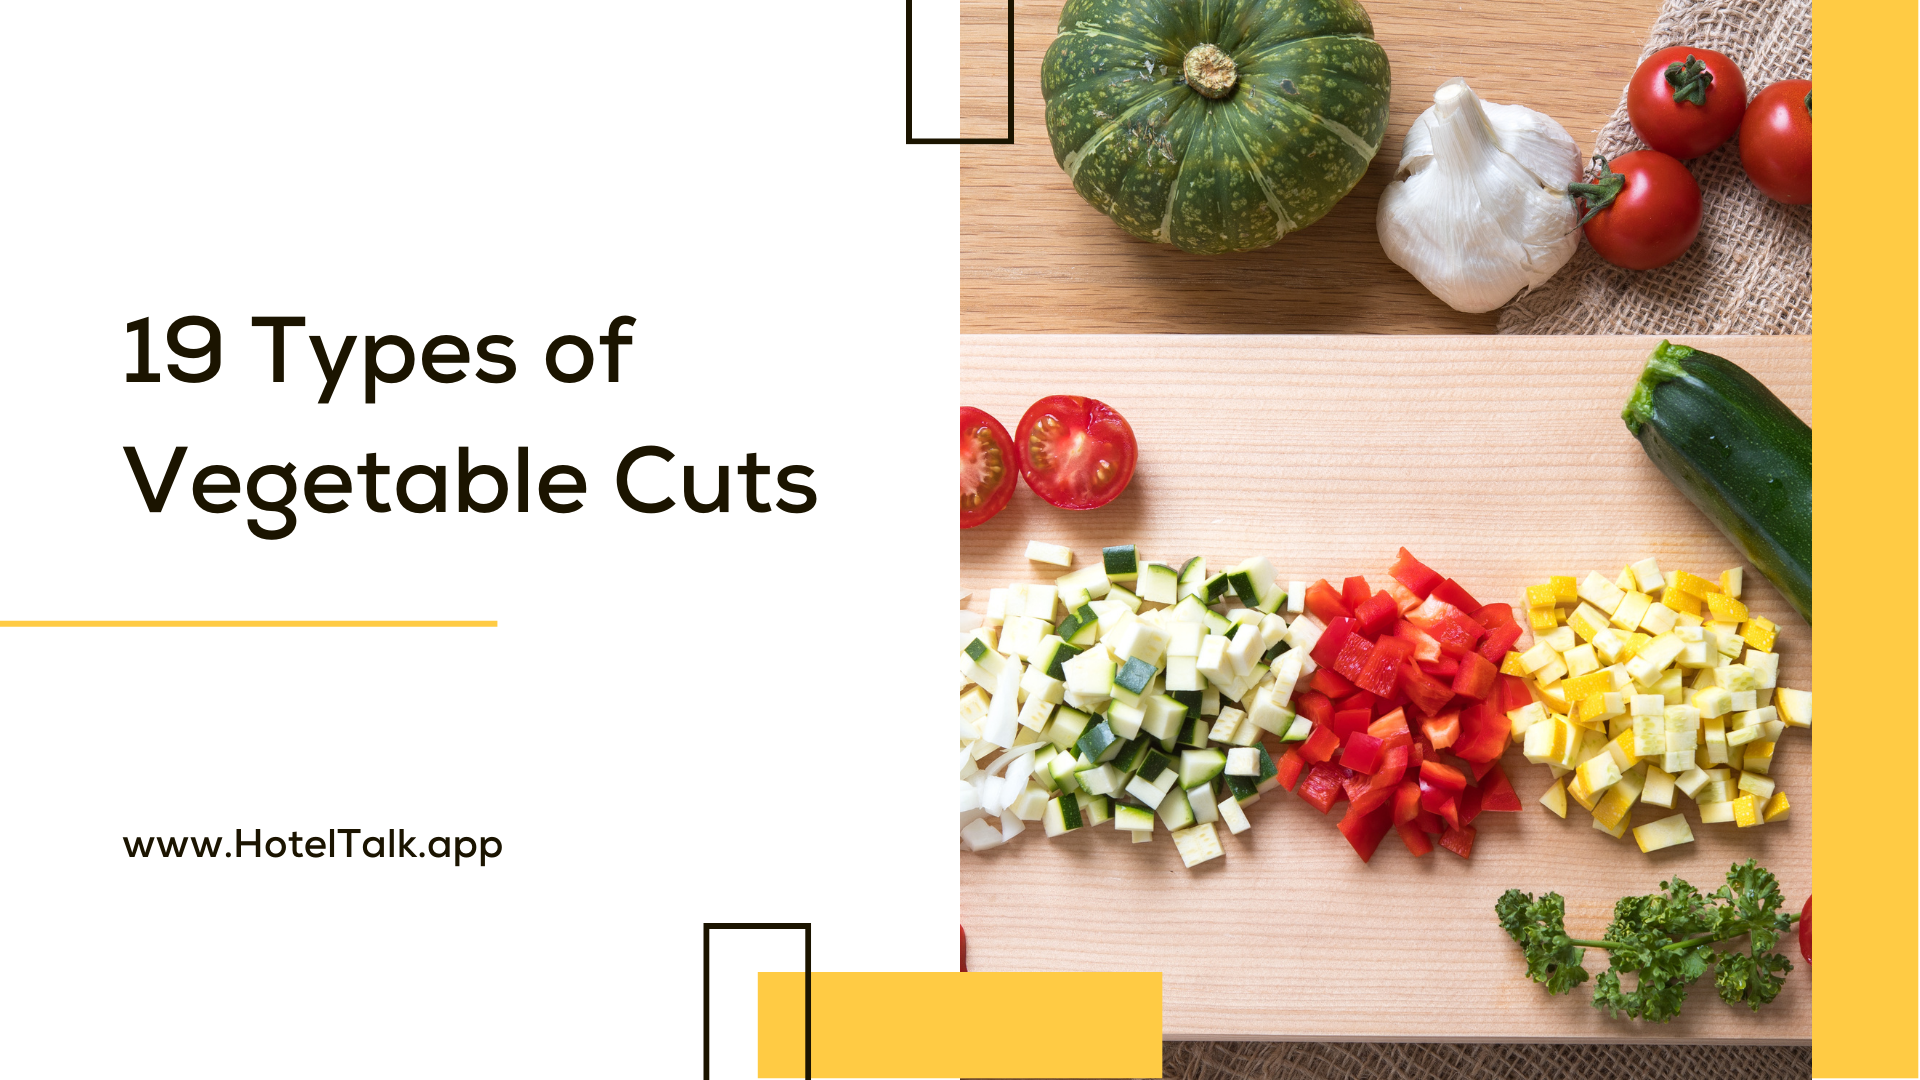 19 Types of Vegetable Cuts